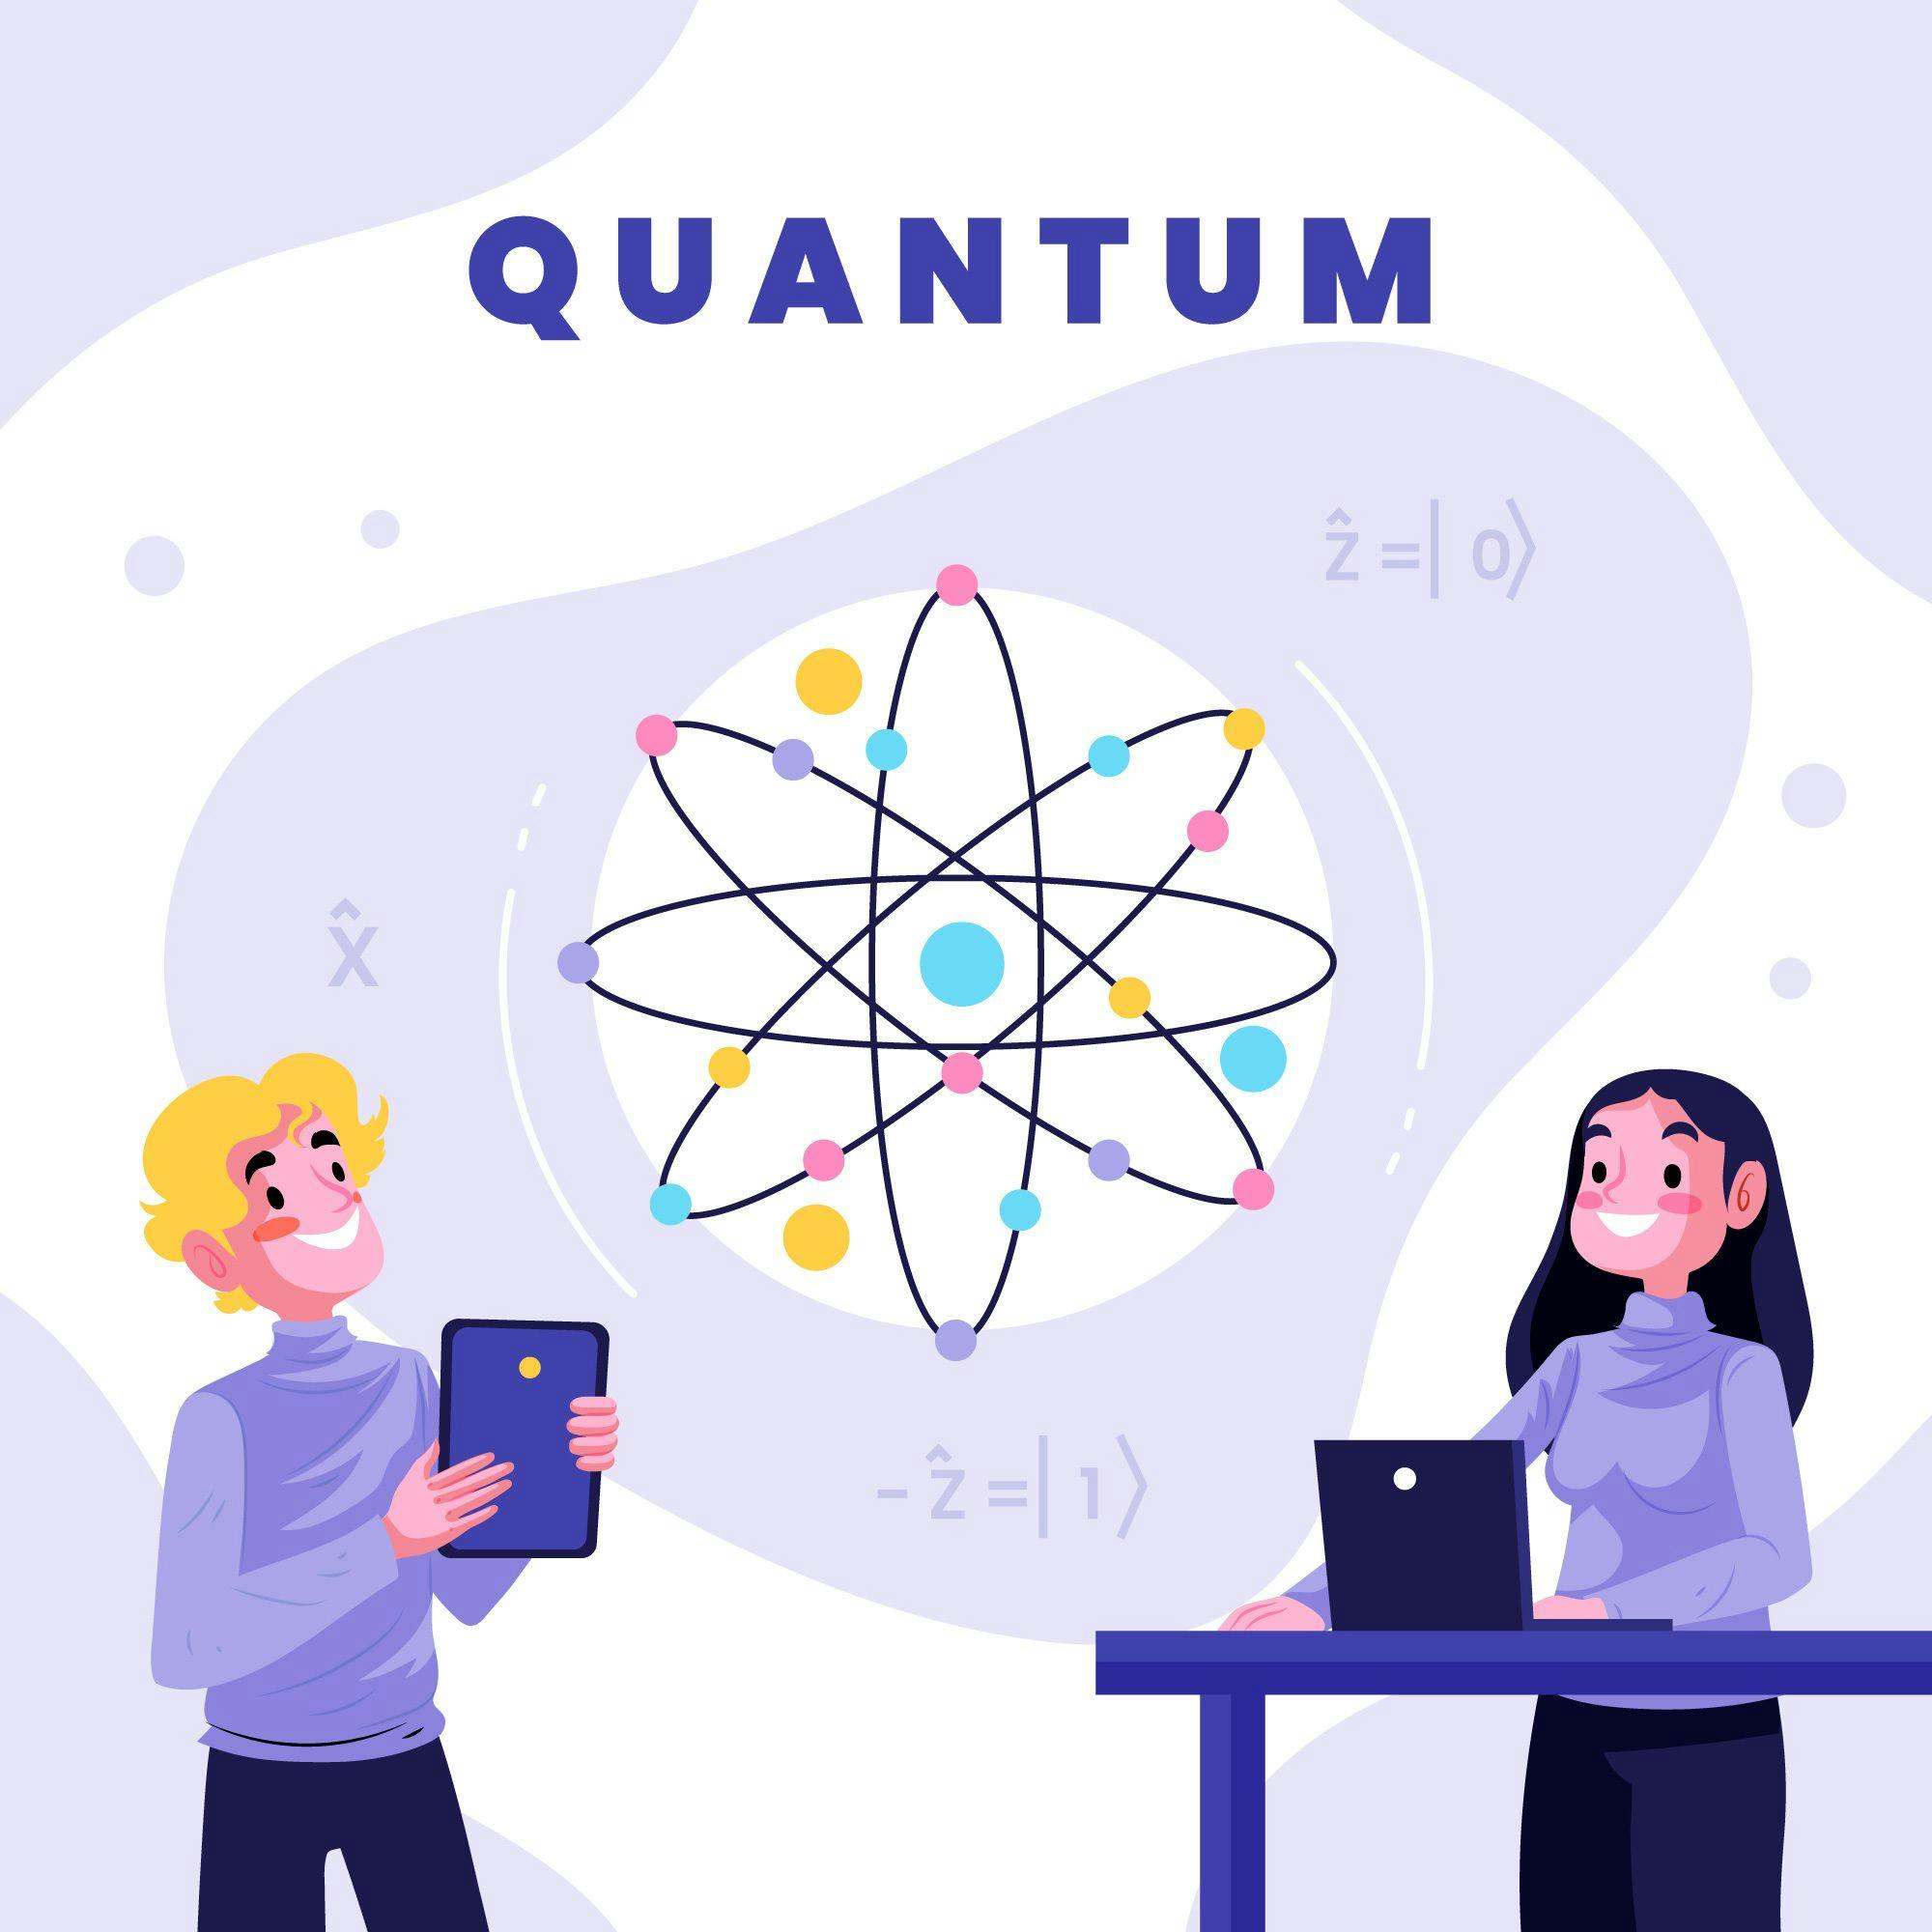 When matter and information merge into “Quantum” thumbnail